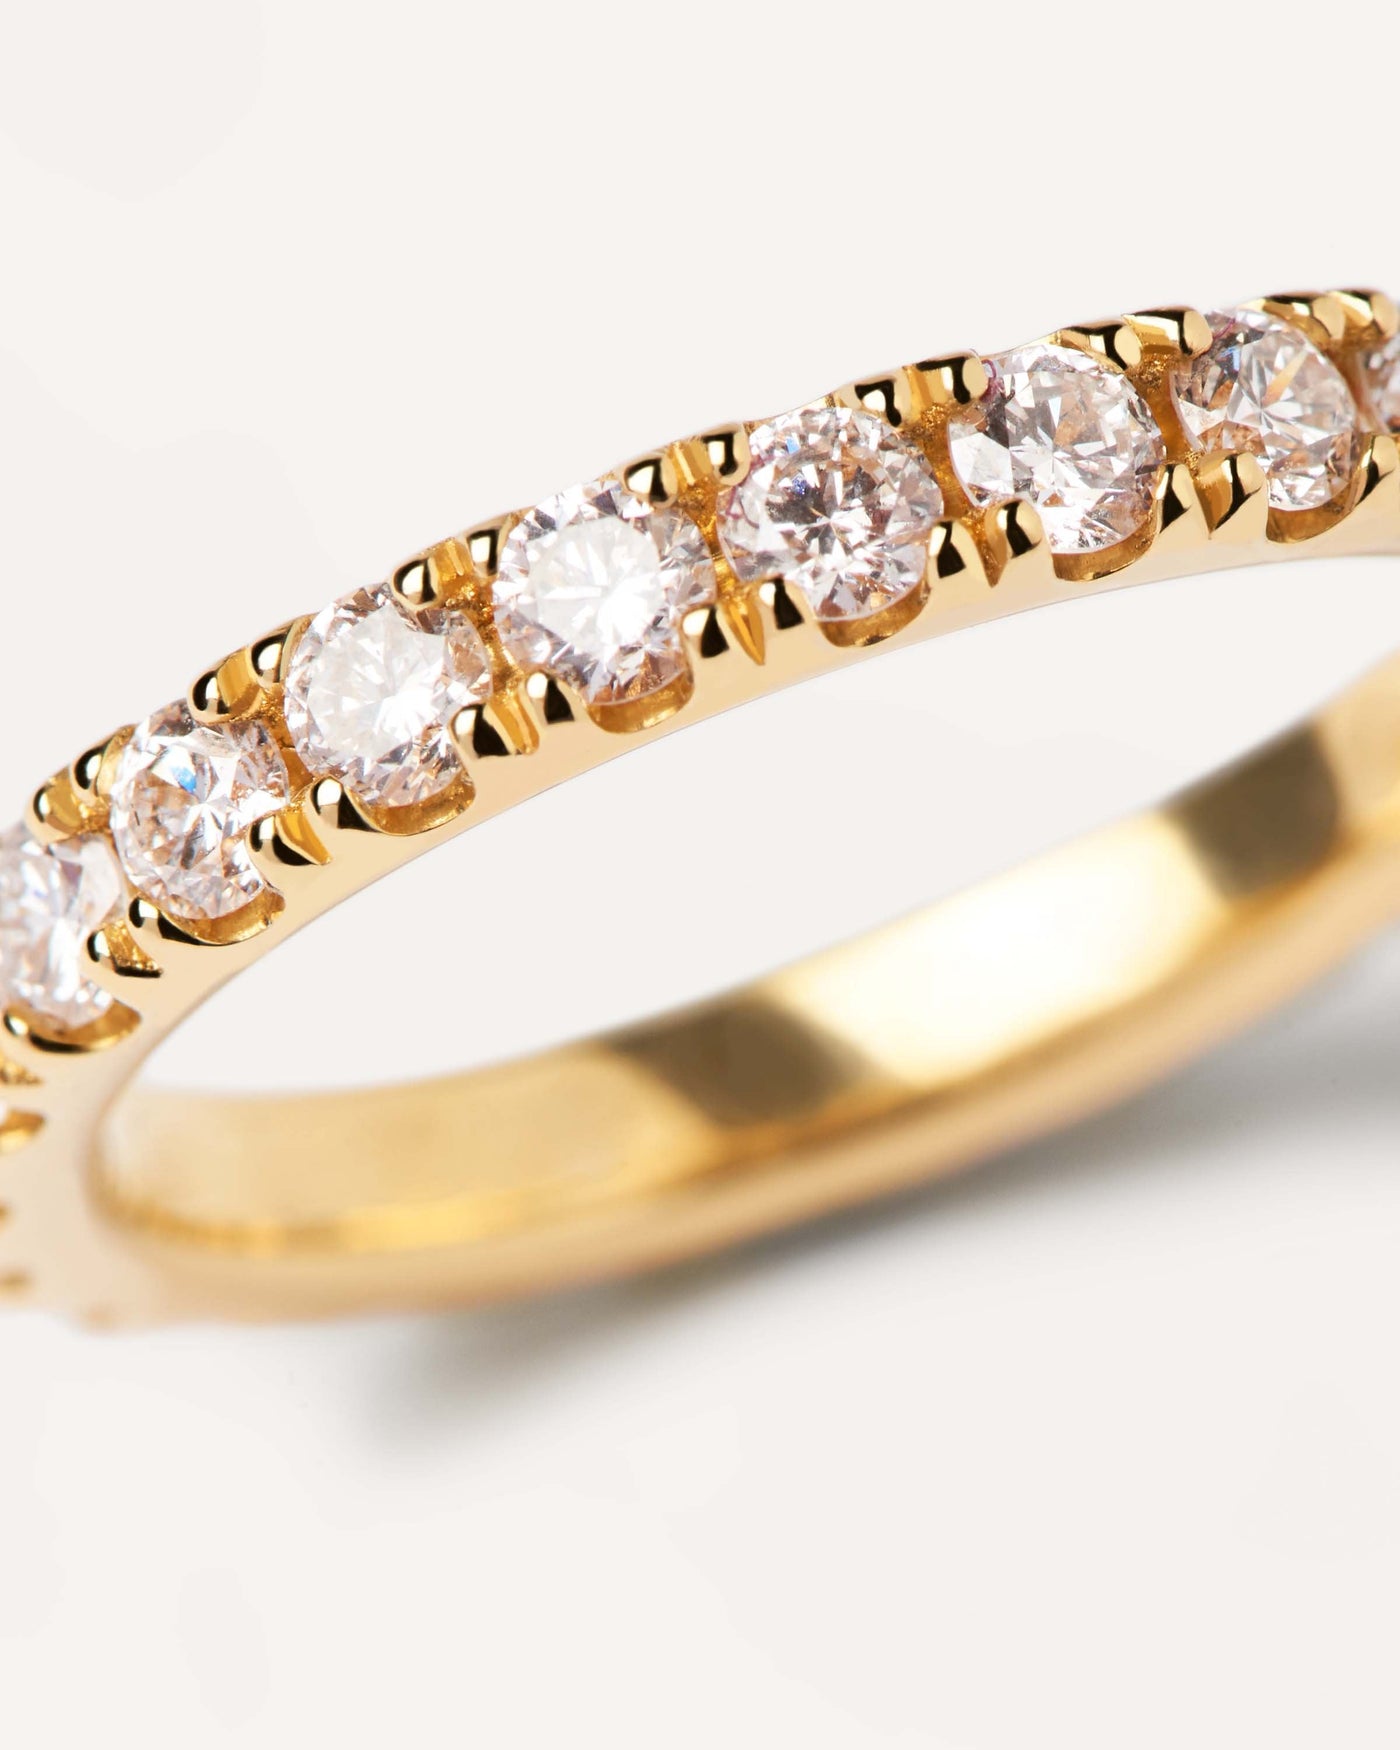 2023 Selection | Diamonds and gold Eternity Supreme Ring. 18K yellow gold eternity ring, set with big lab-grown diamonds, equaling 1.55 carats. Get the latest arrival from PDPAOLA. Place your order safely and get this Best Seller. Free Shipping.